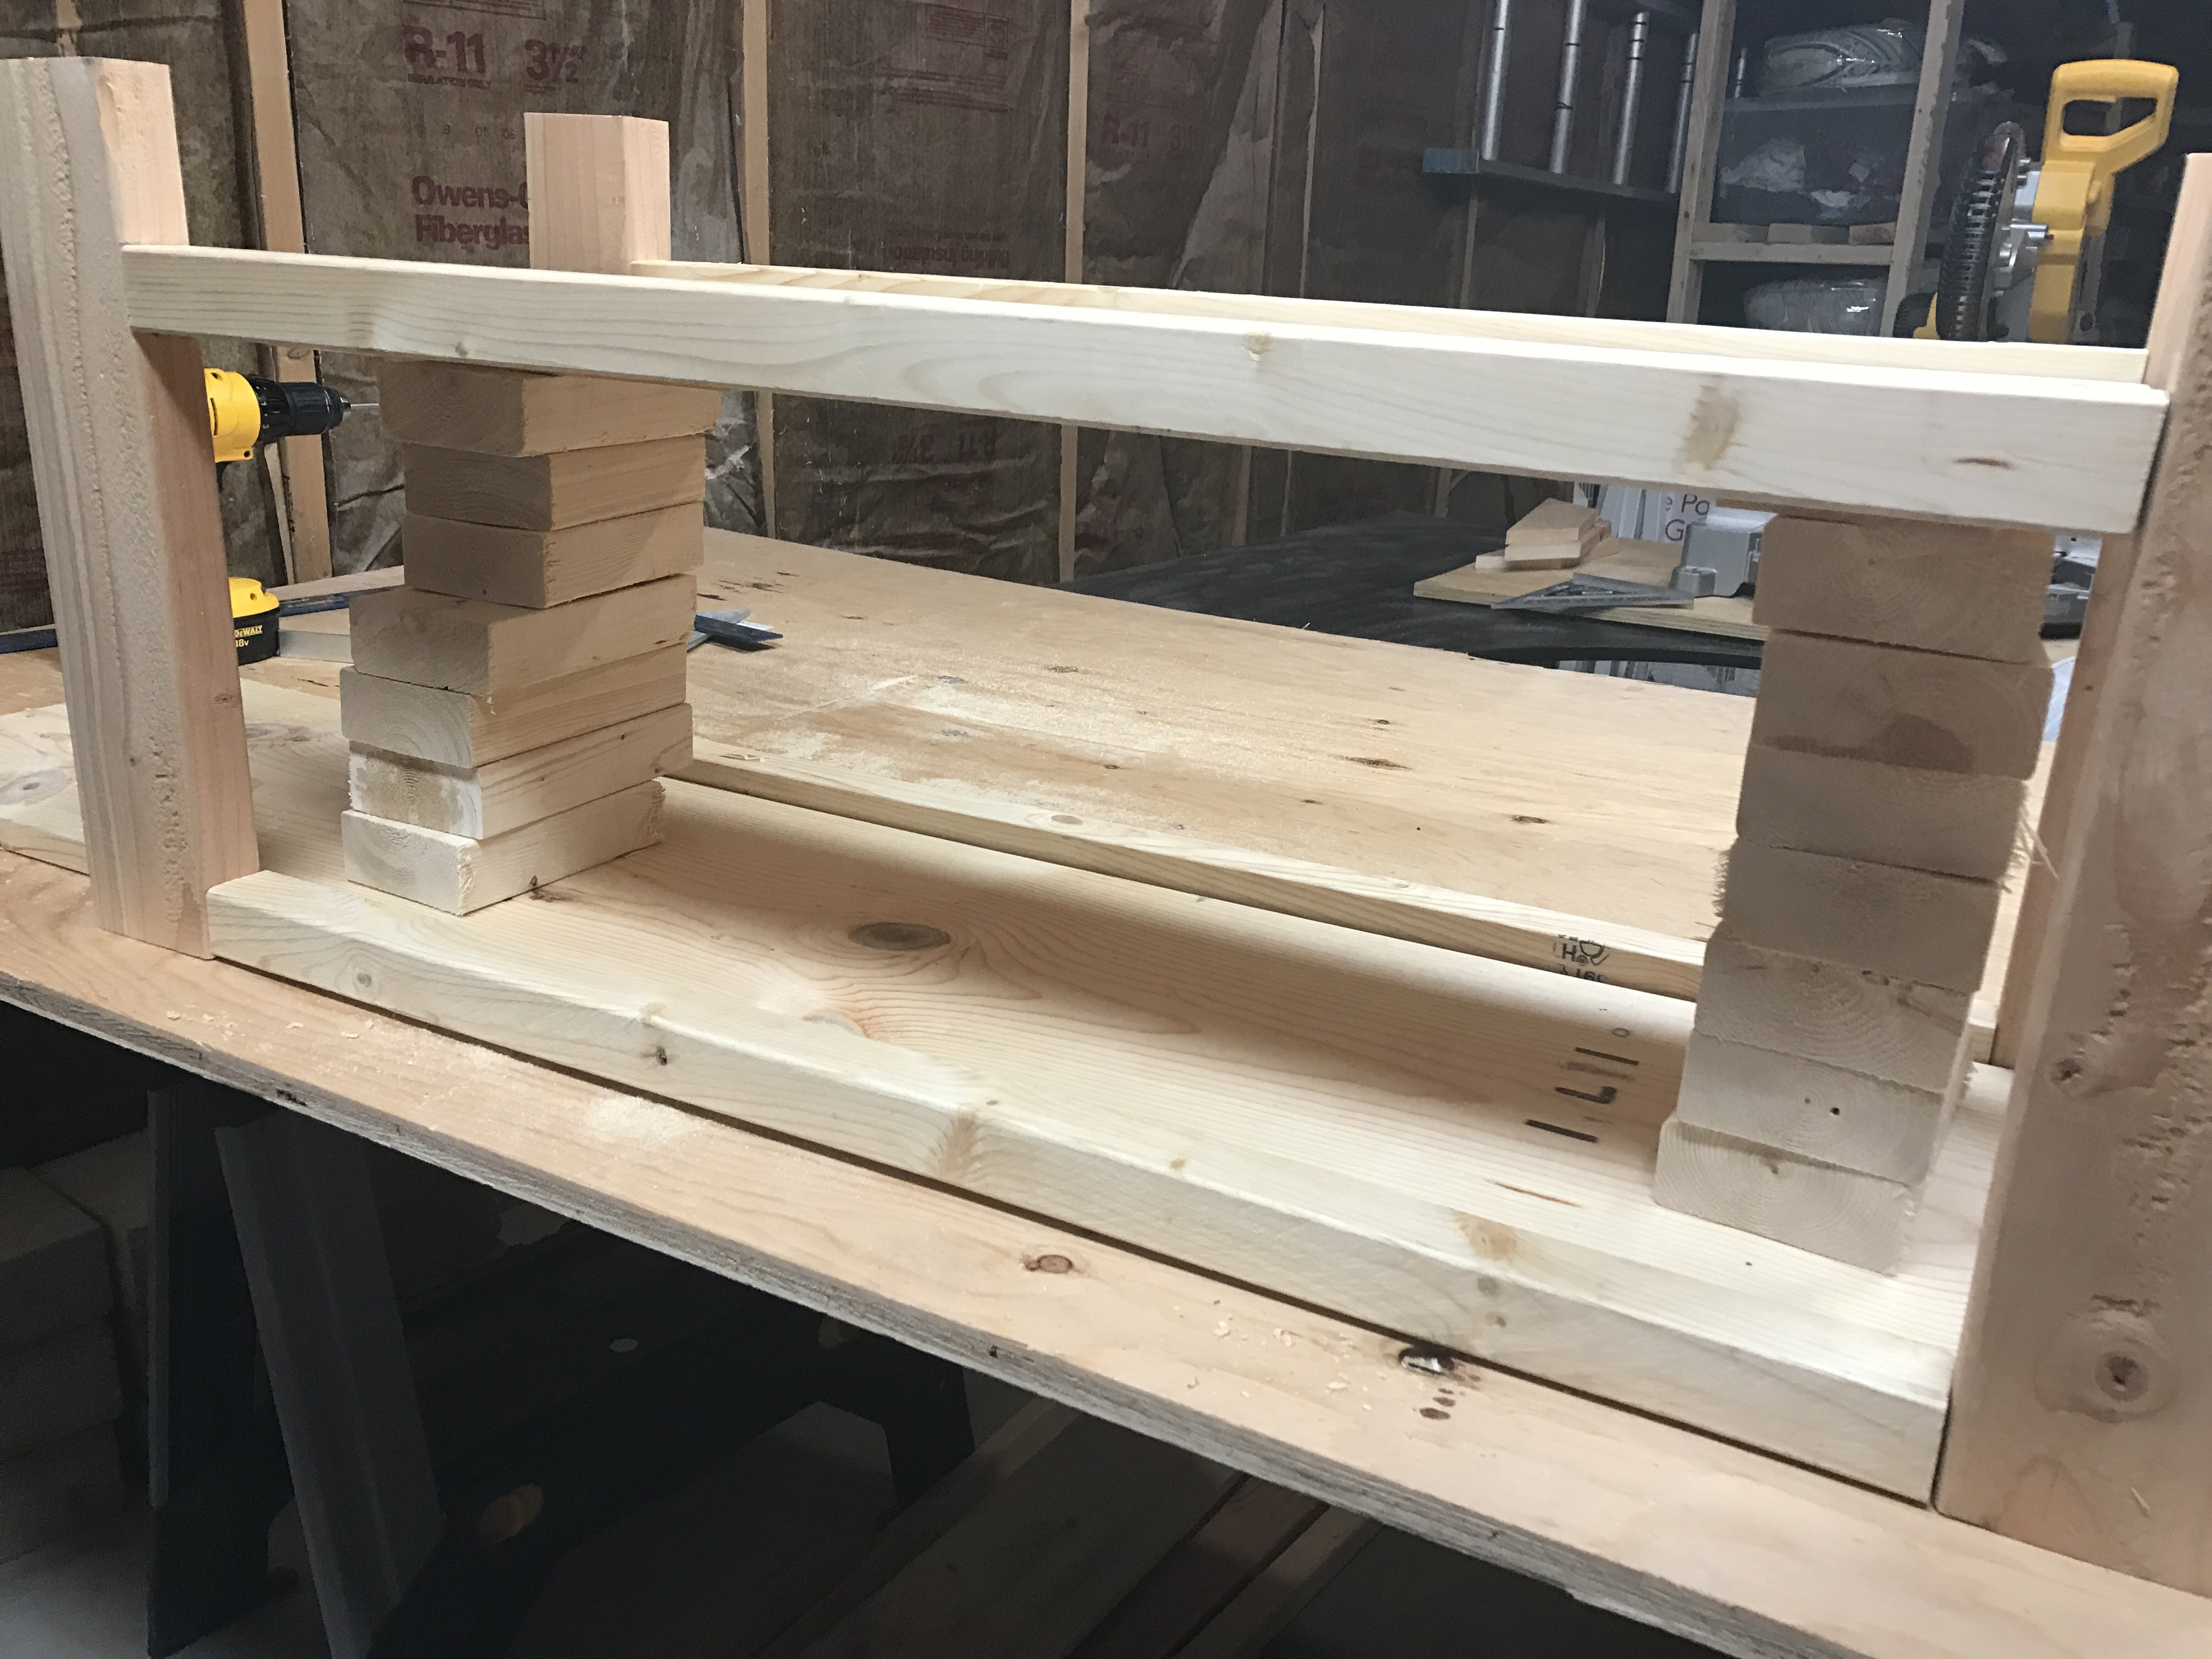 scrap lumber holding shelf in place to facilitate clamping